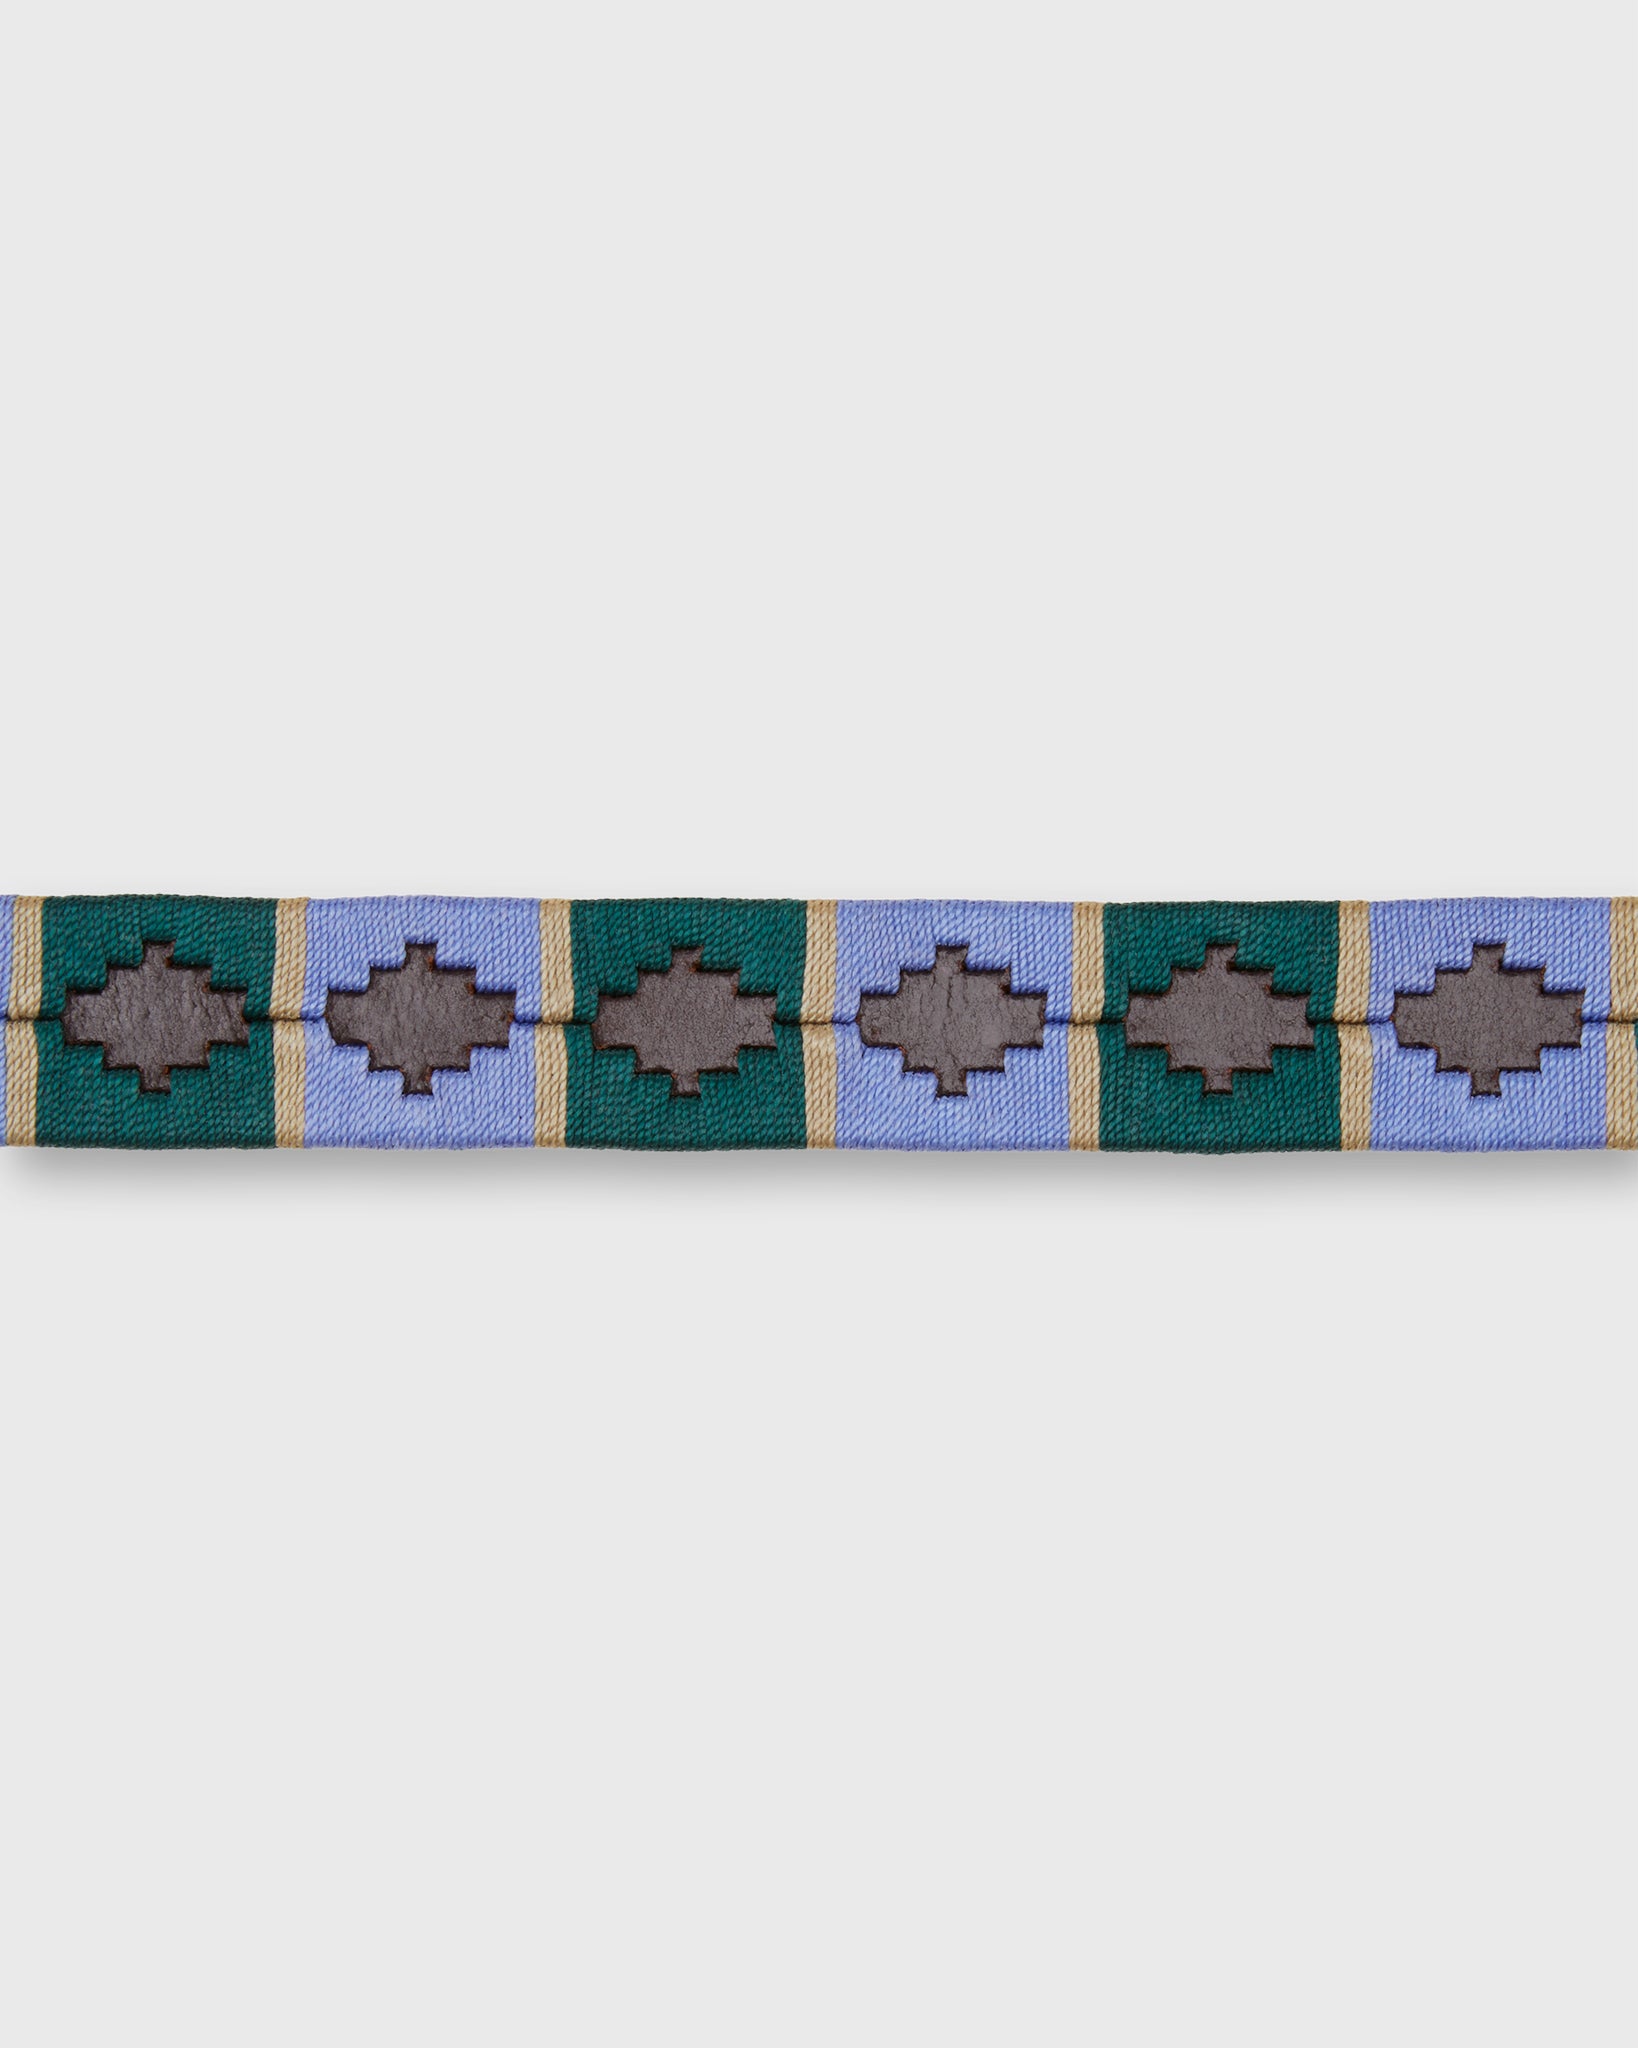 1 1/8" Polo Belt in Lavender/Green/Khaki Chocolate Leather